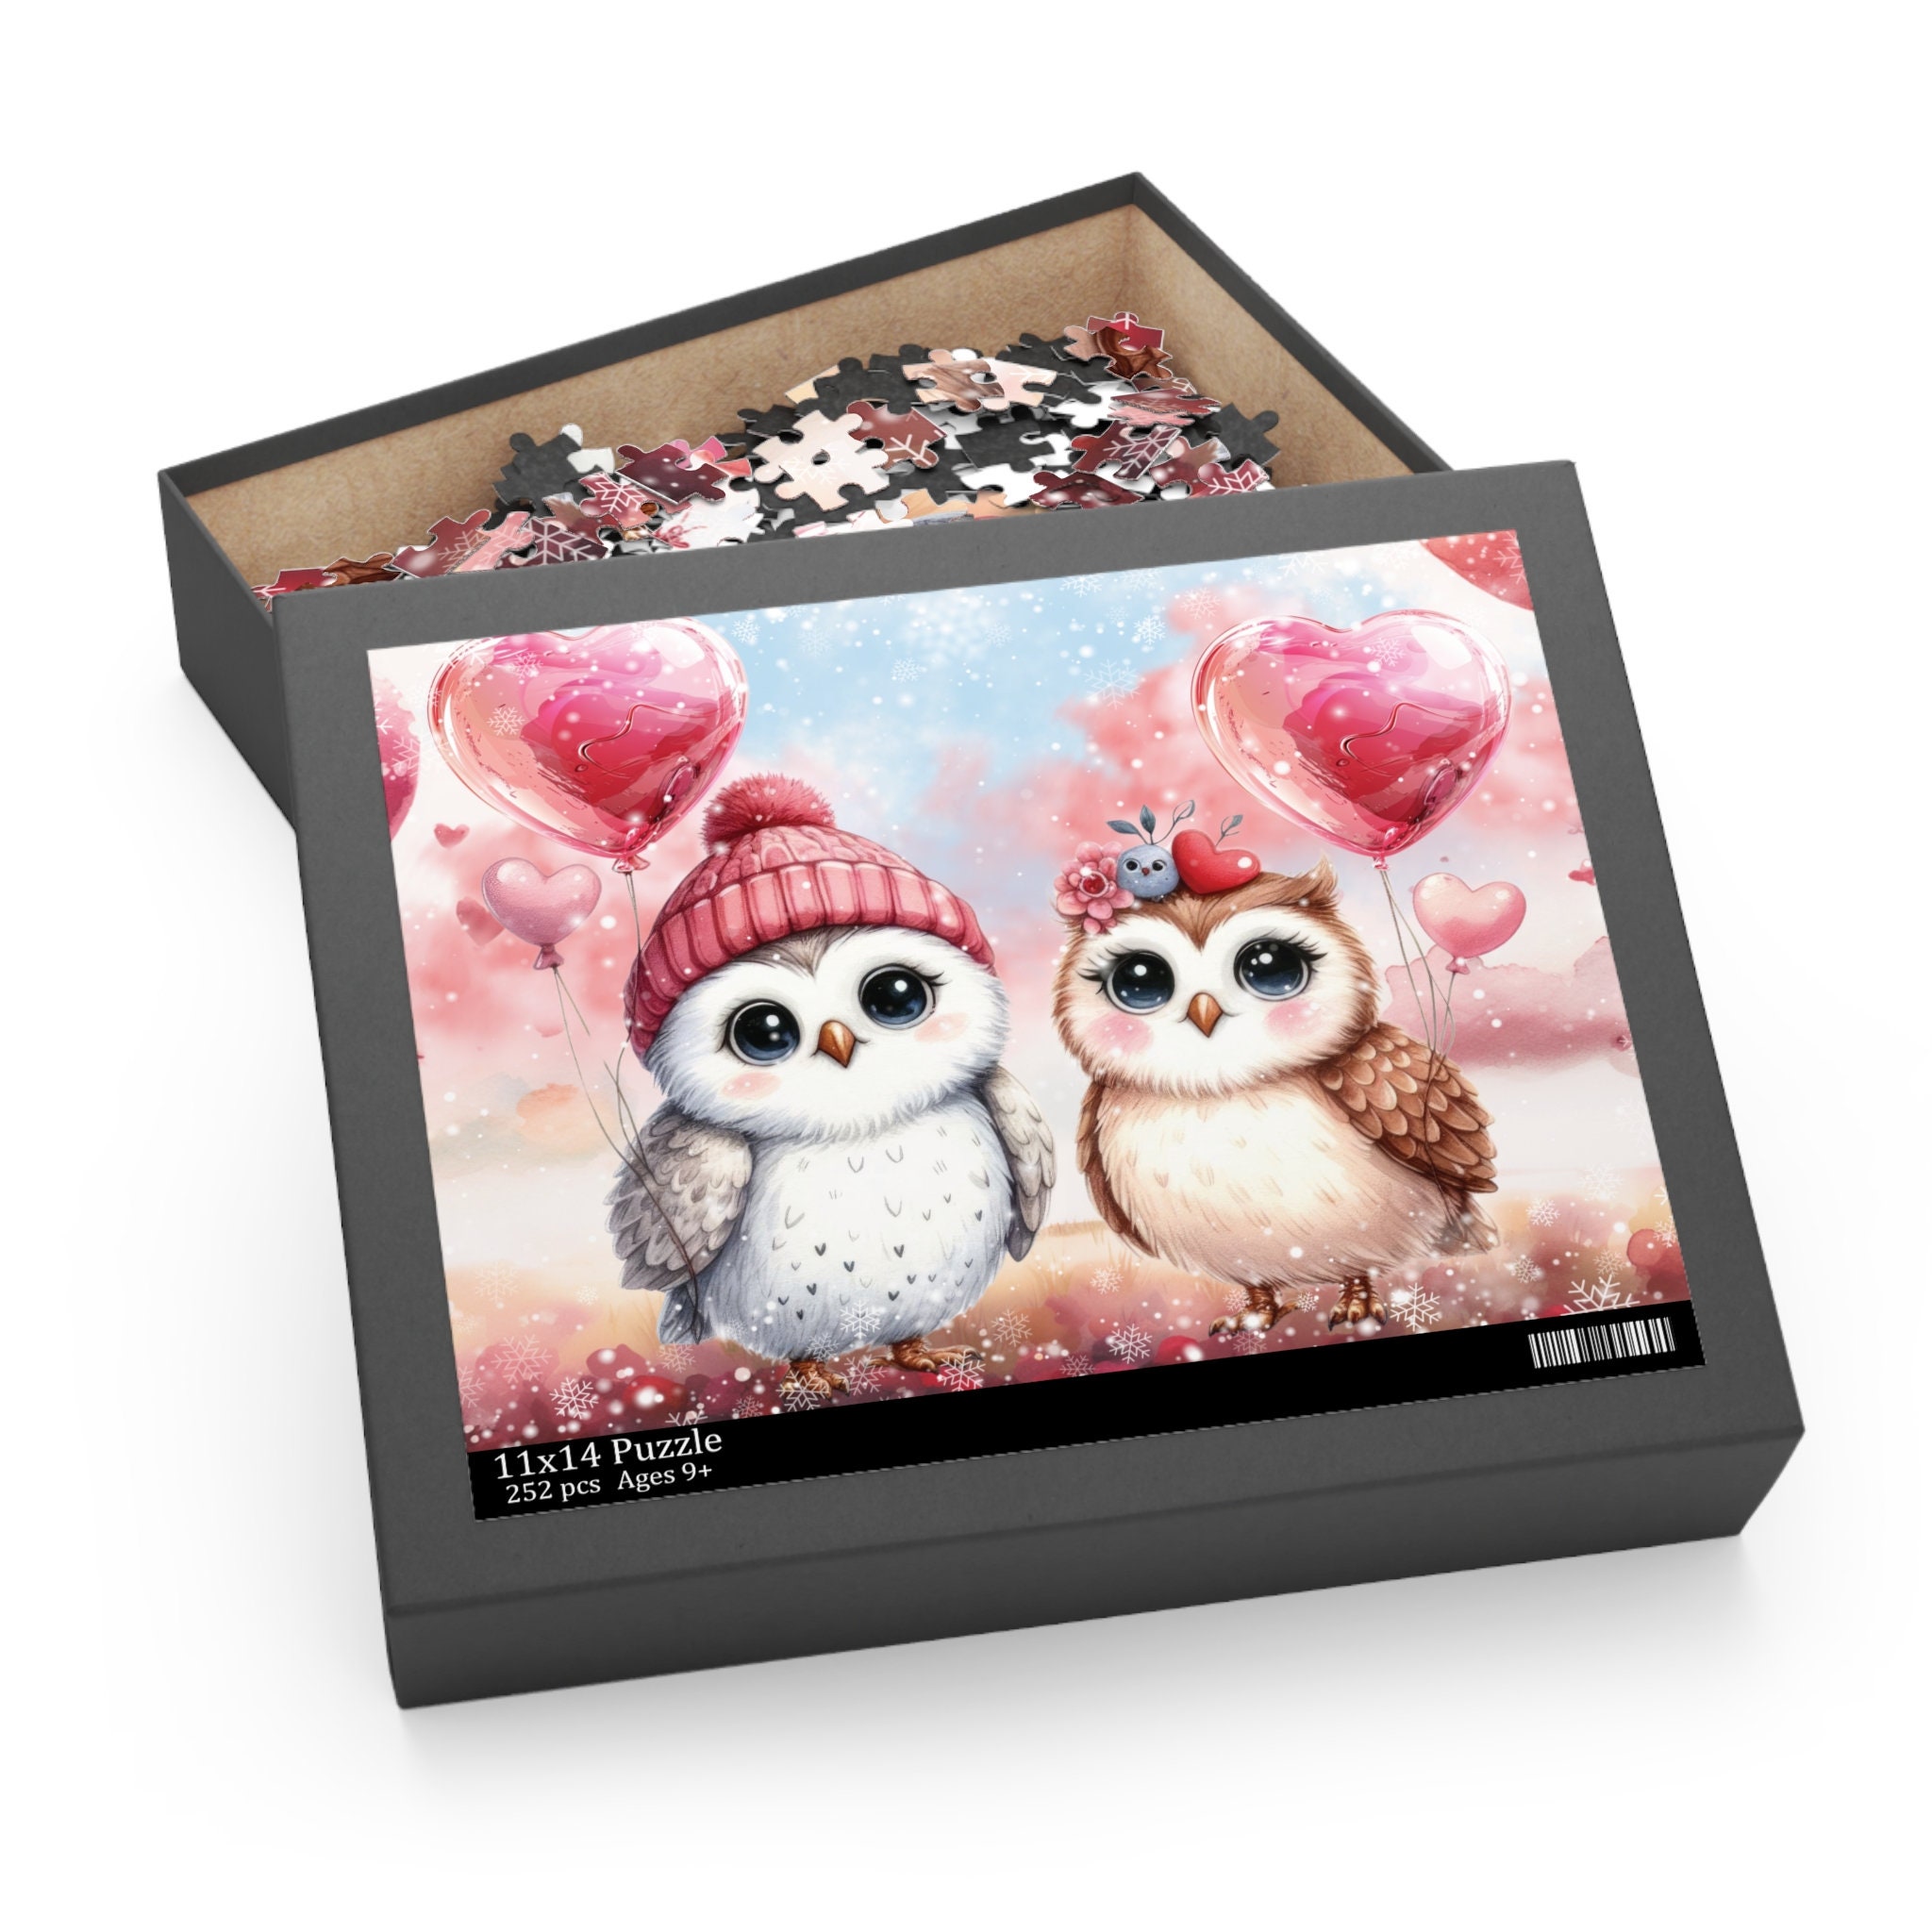 Puzzles of Two Loving Owls Puzzle with heart-shaped balloons. Puzzles come in sizes: 120 pieces, 252